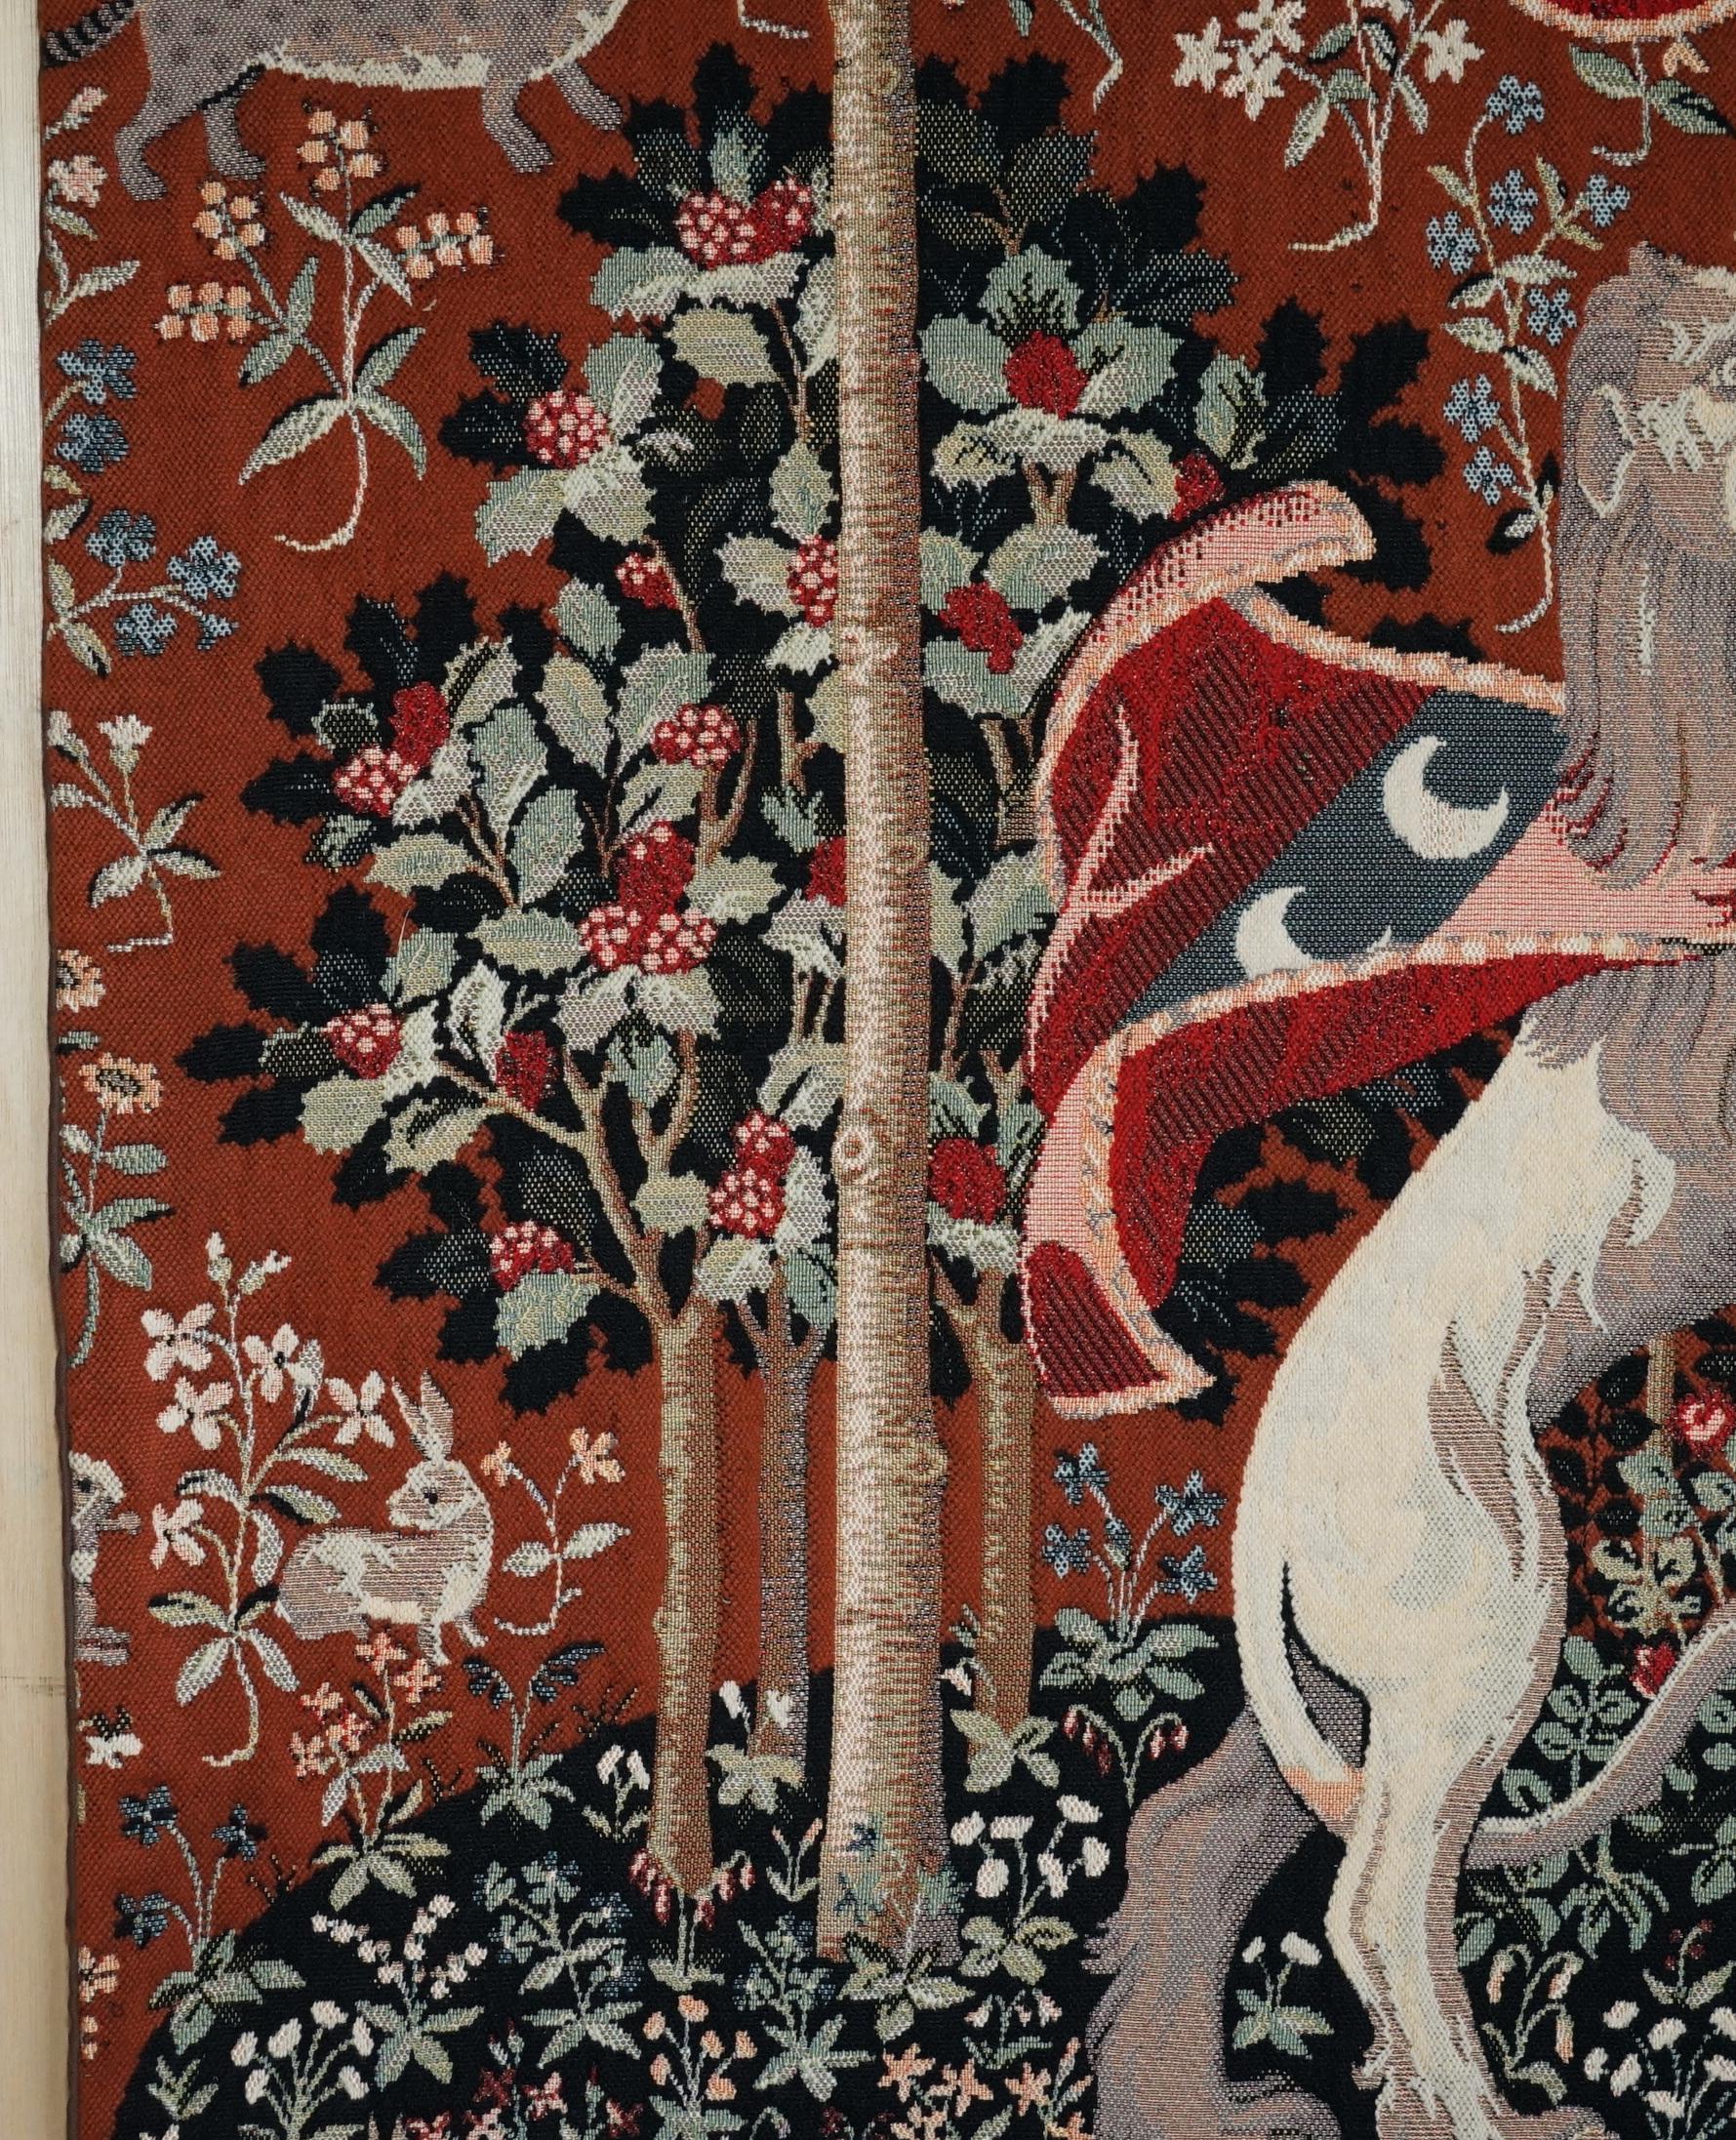 ViNTAGE THE LADY AND THE UNICORN LARGE WALL HANGING WOVEN TAPESTRY 216CM X 189CM For Sale 4